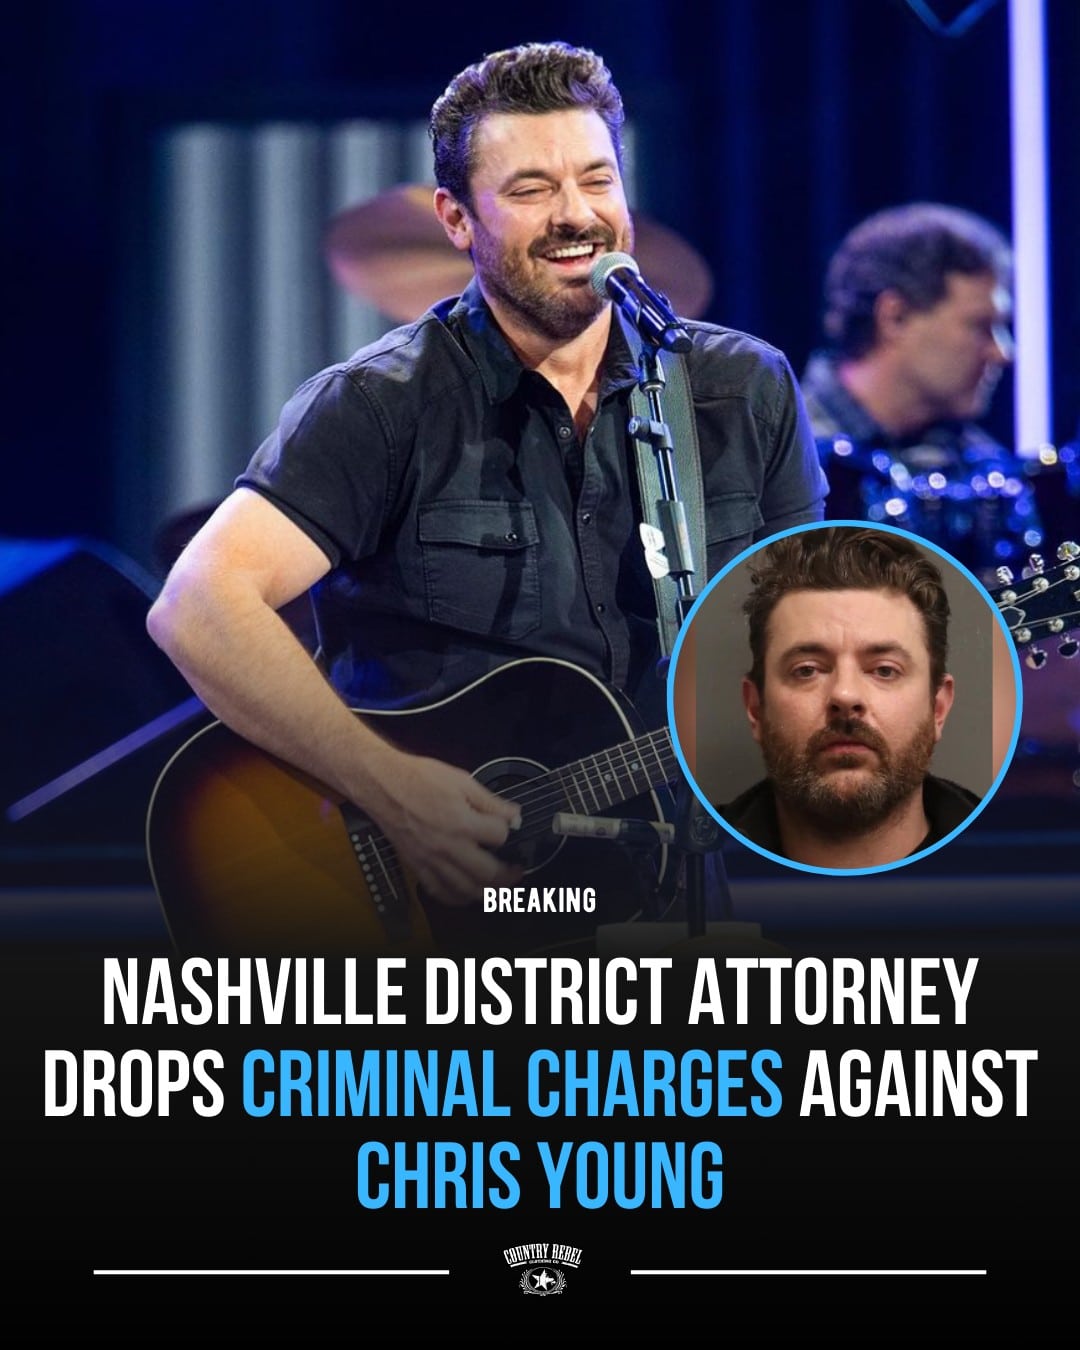 Tracy Lawrence & Chris Young got together to sing "Find Out Who Your Friends Are" after charges against Chris were dropped following his Nashville arrest